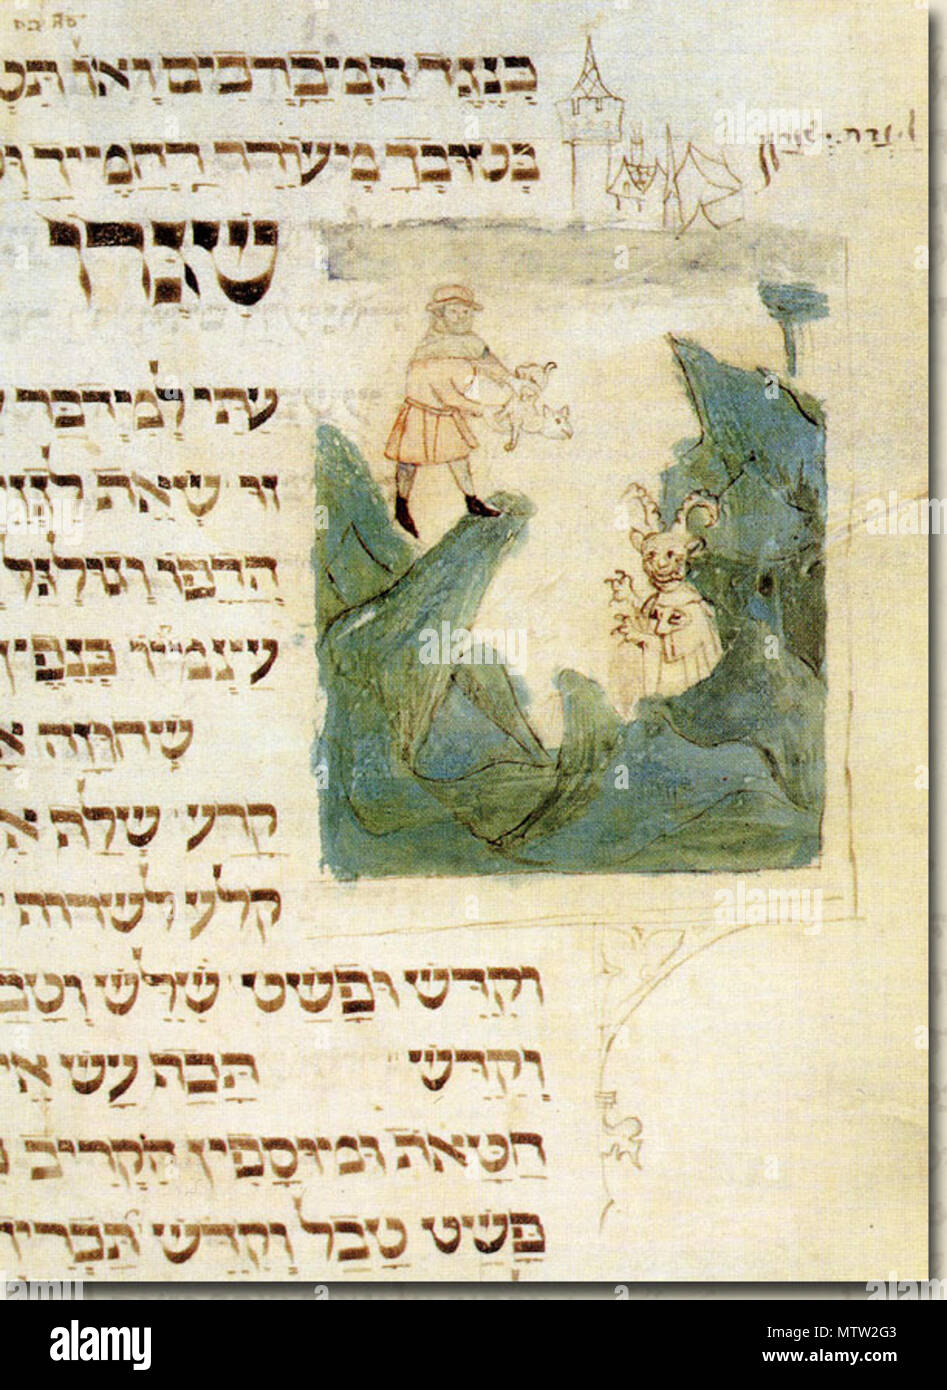 . English: In accordance with the tradition for the Day of Atonement (Yom Kippurim) in Leviticus 16:22, a scapegoat is cast from Mount Azazel into the abyss, to Azael, who appears as a horned and clawed mountain demon or devil. Illustration from a Machzor produced in Germany, perhaps Heilbronn, between 1370 and 1400 (MS Kaufmann A 387). 14th century. Unknown 293 Illustration-azazel Stock Photo